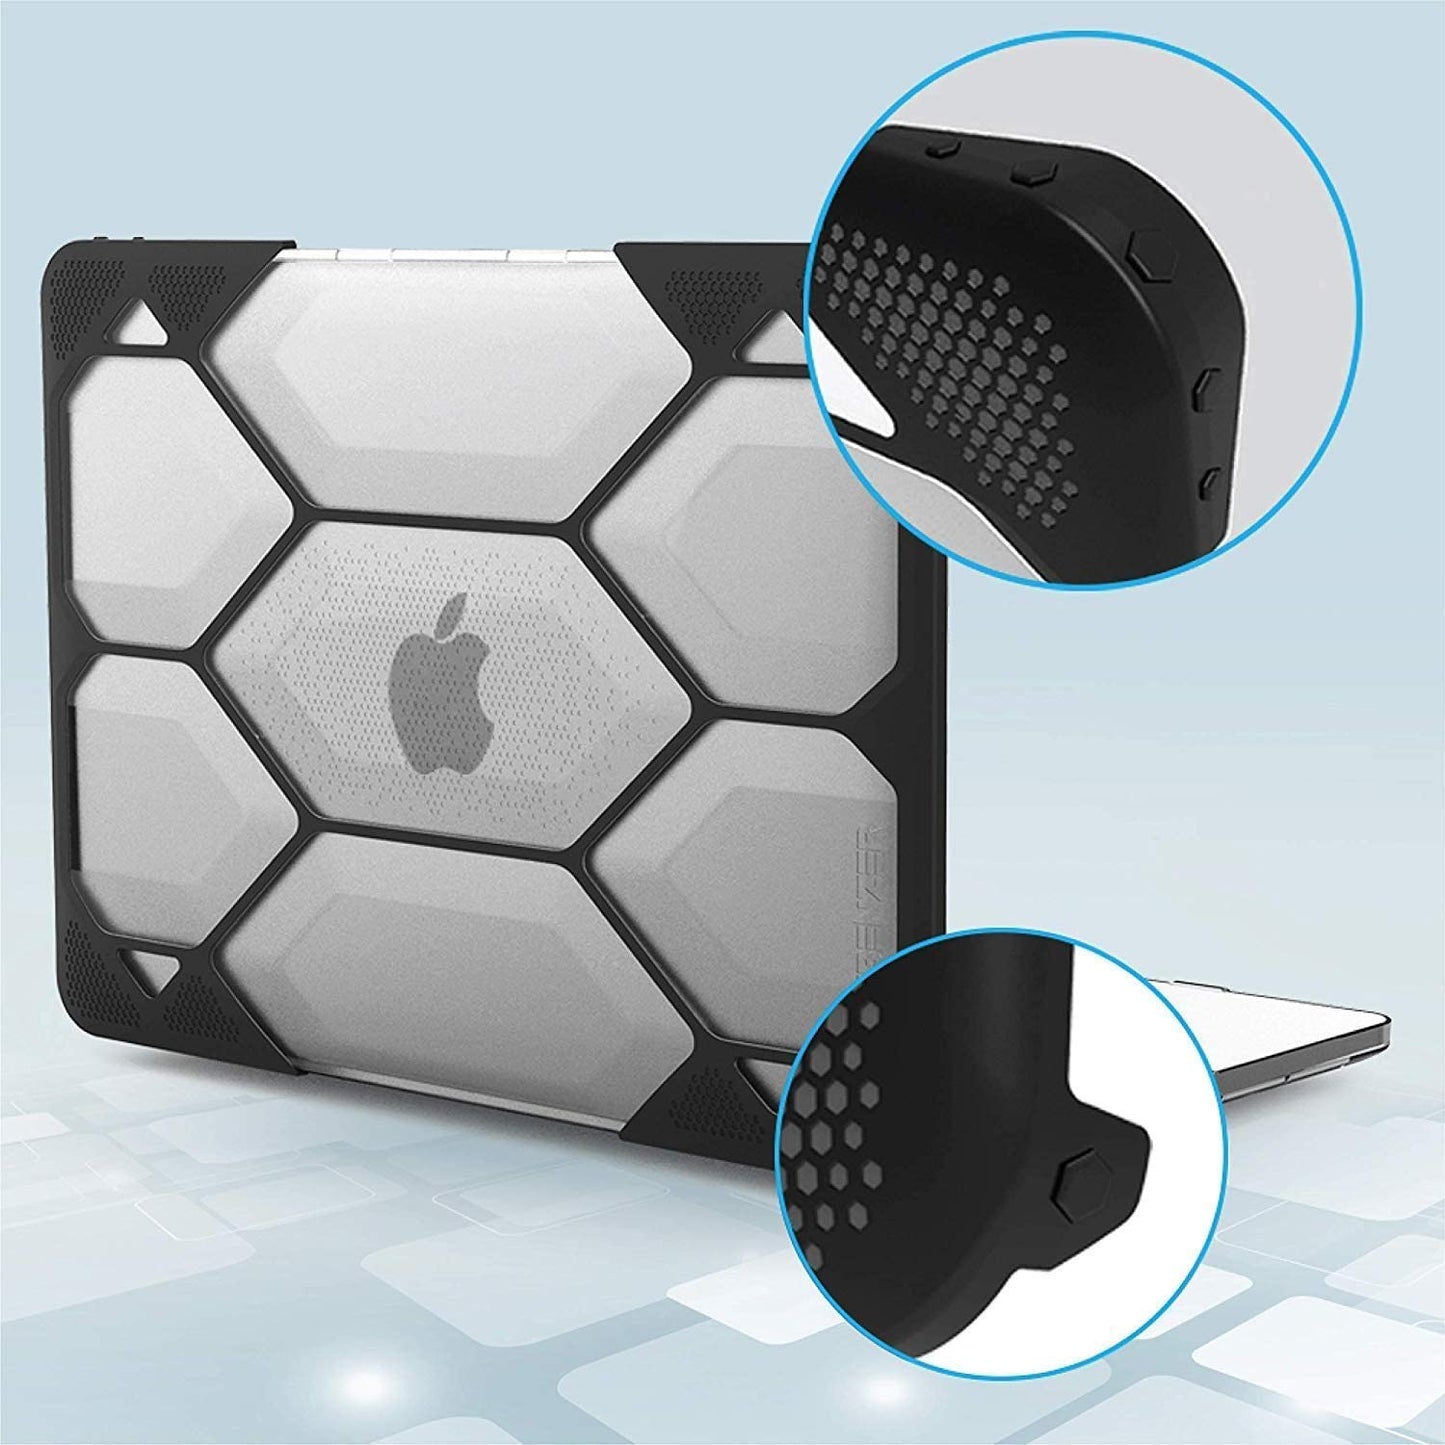 IBENZER Hexpact Protective Case for Macbook Pro 13’’ 2012-2015